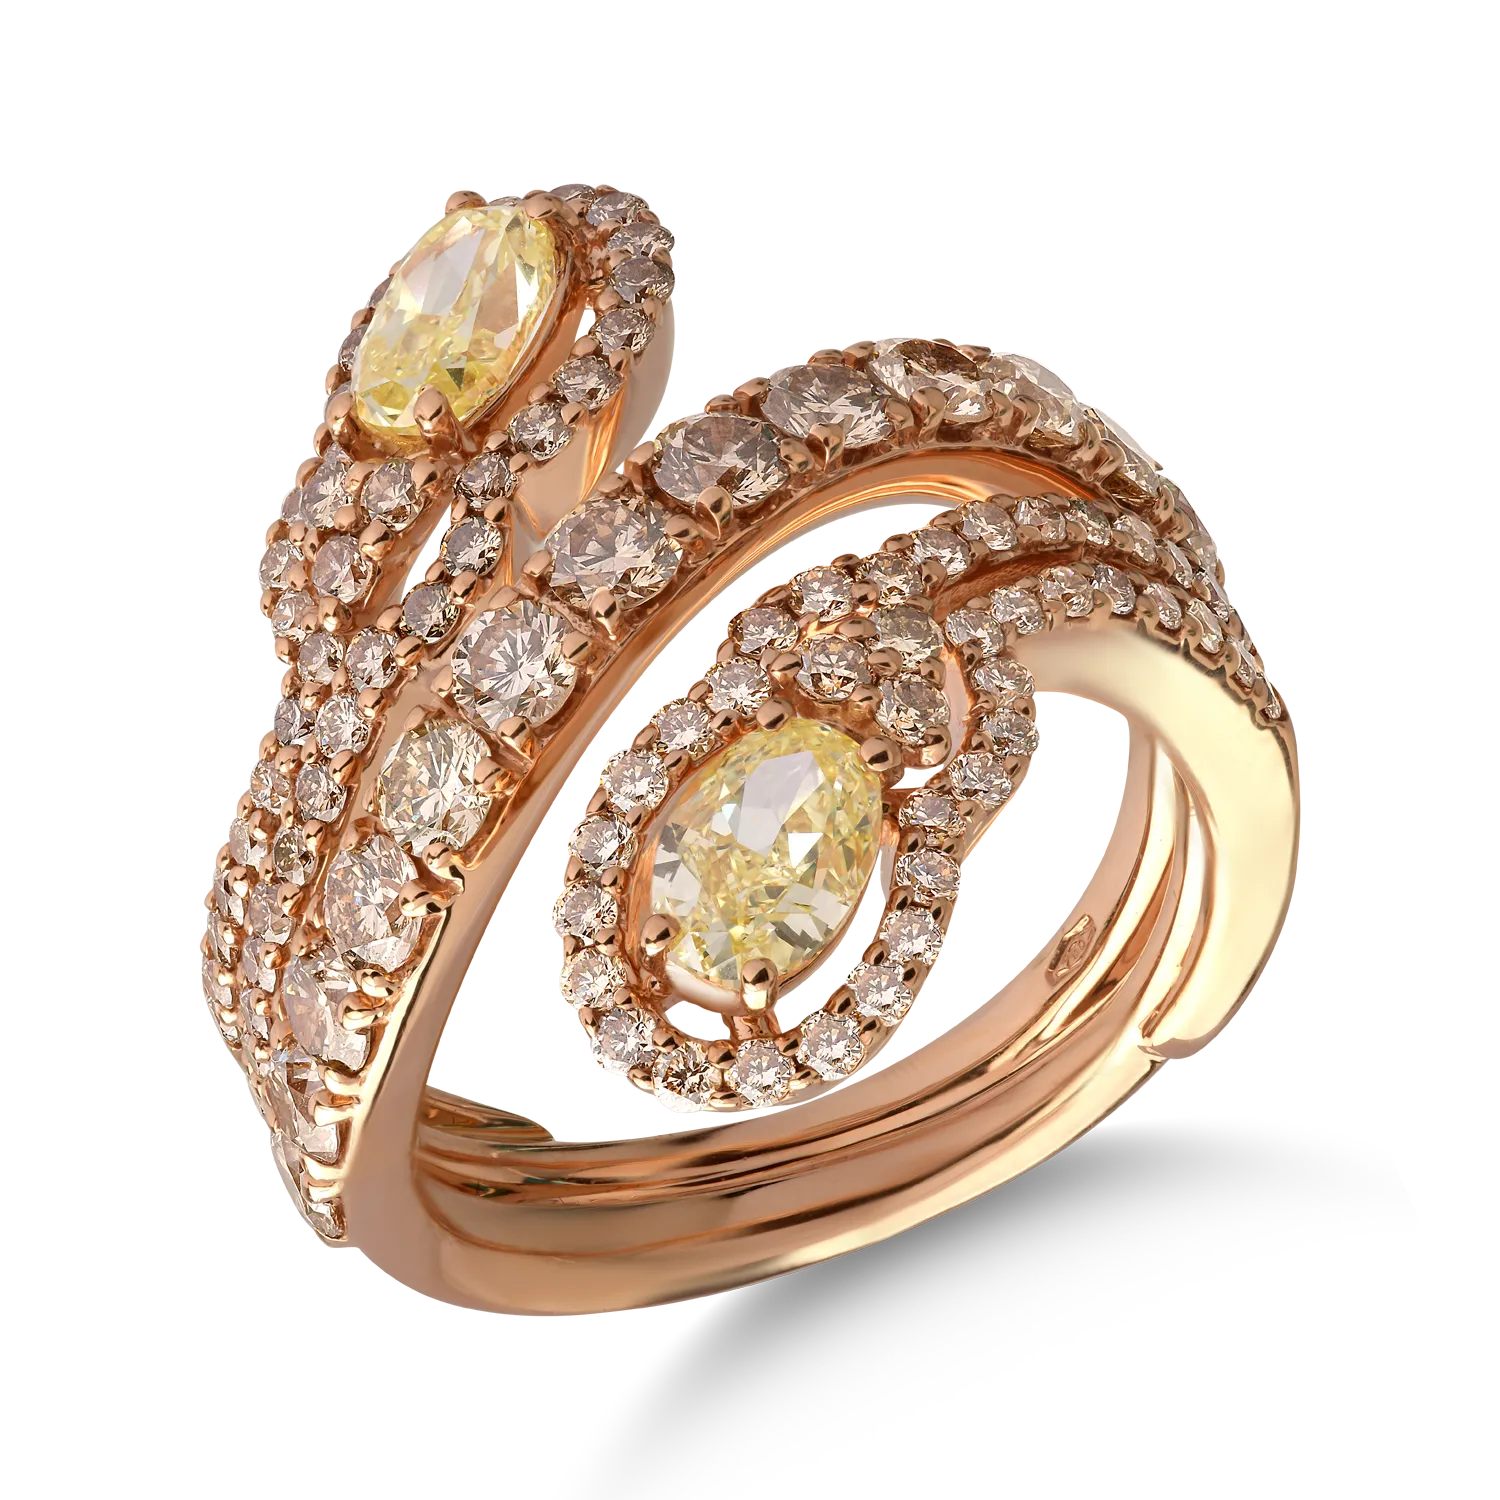 18K rose gold ring with 1.01ct fancy-yellow diamonds and 1.94ct brown diamonds